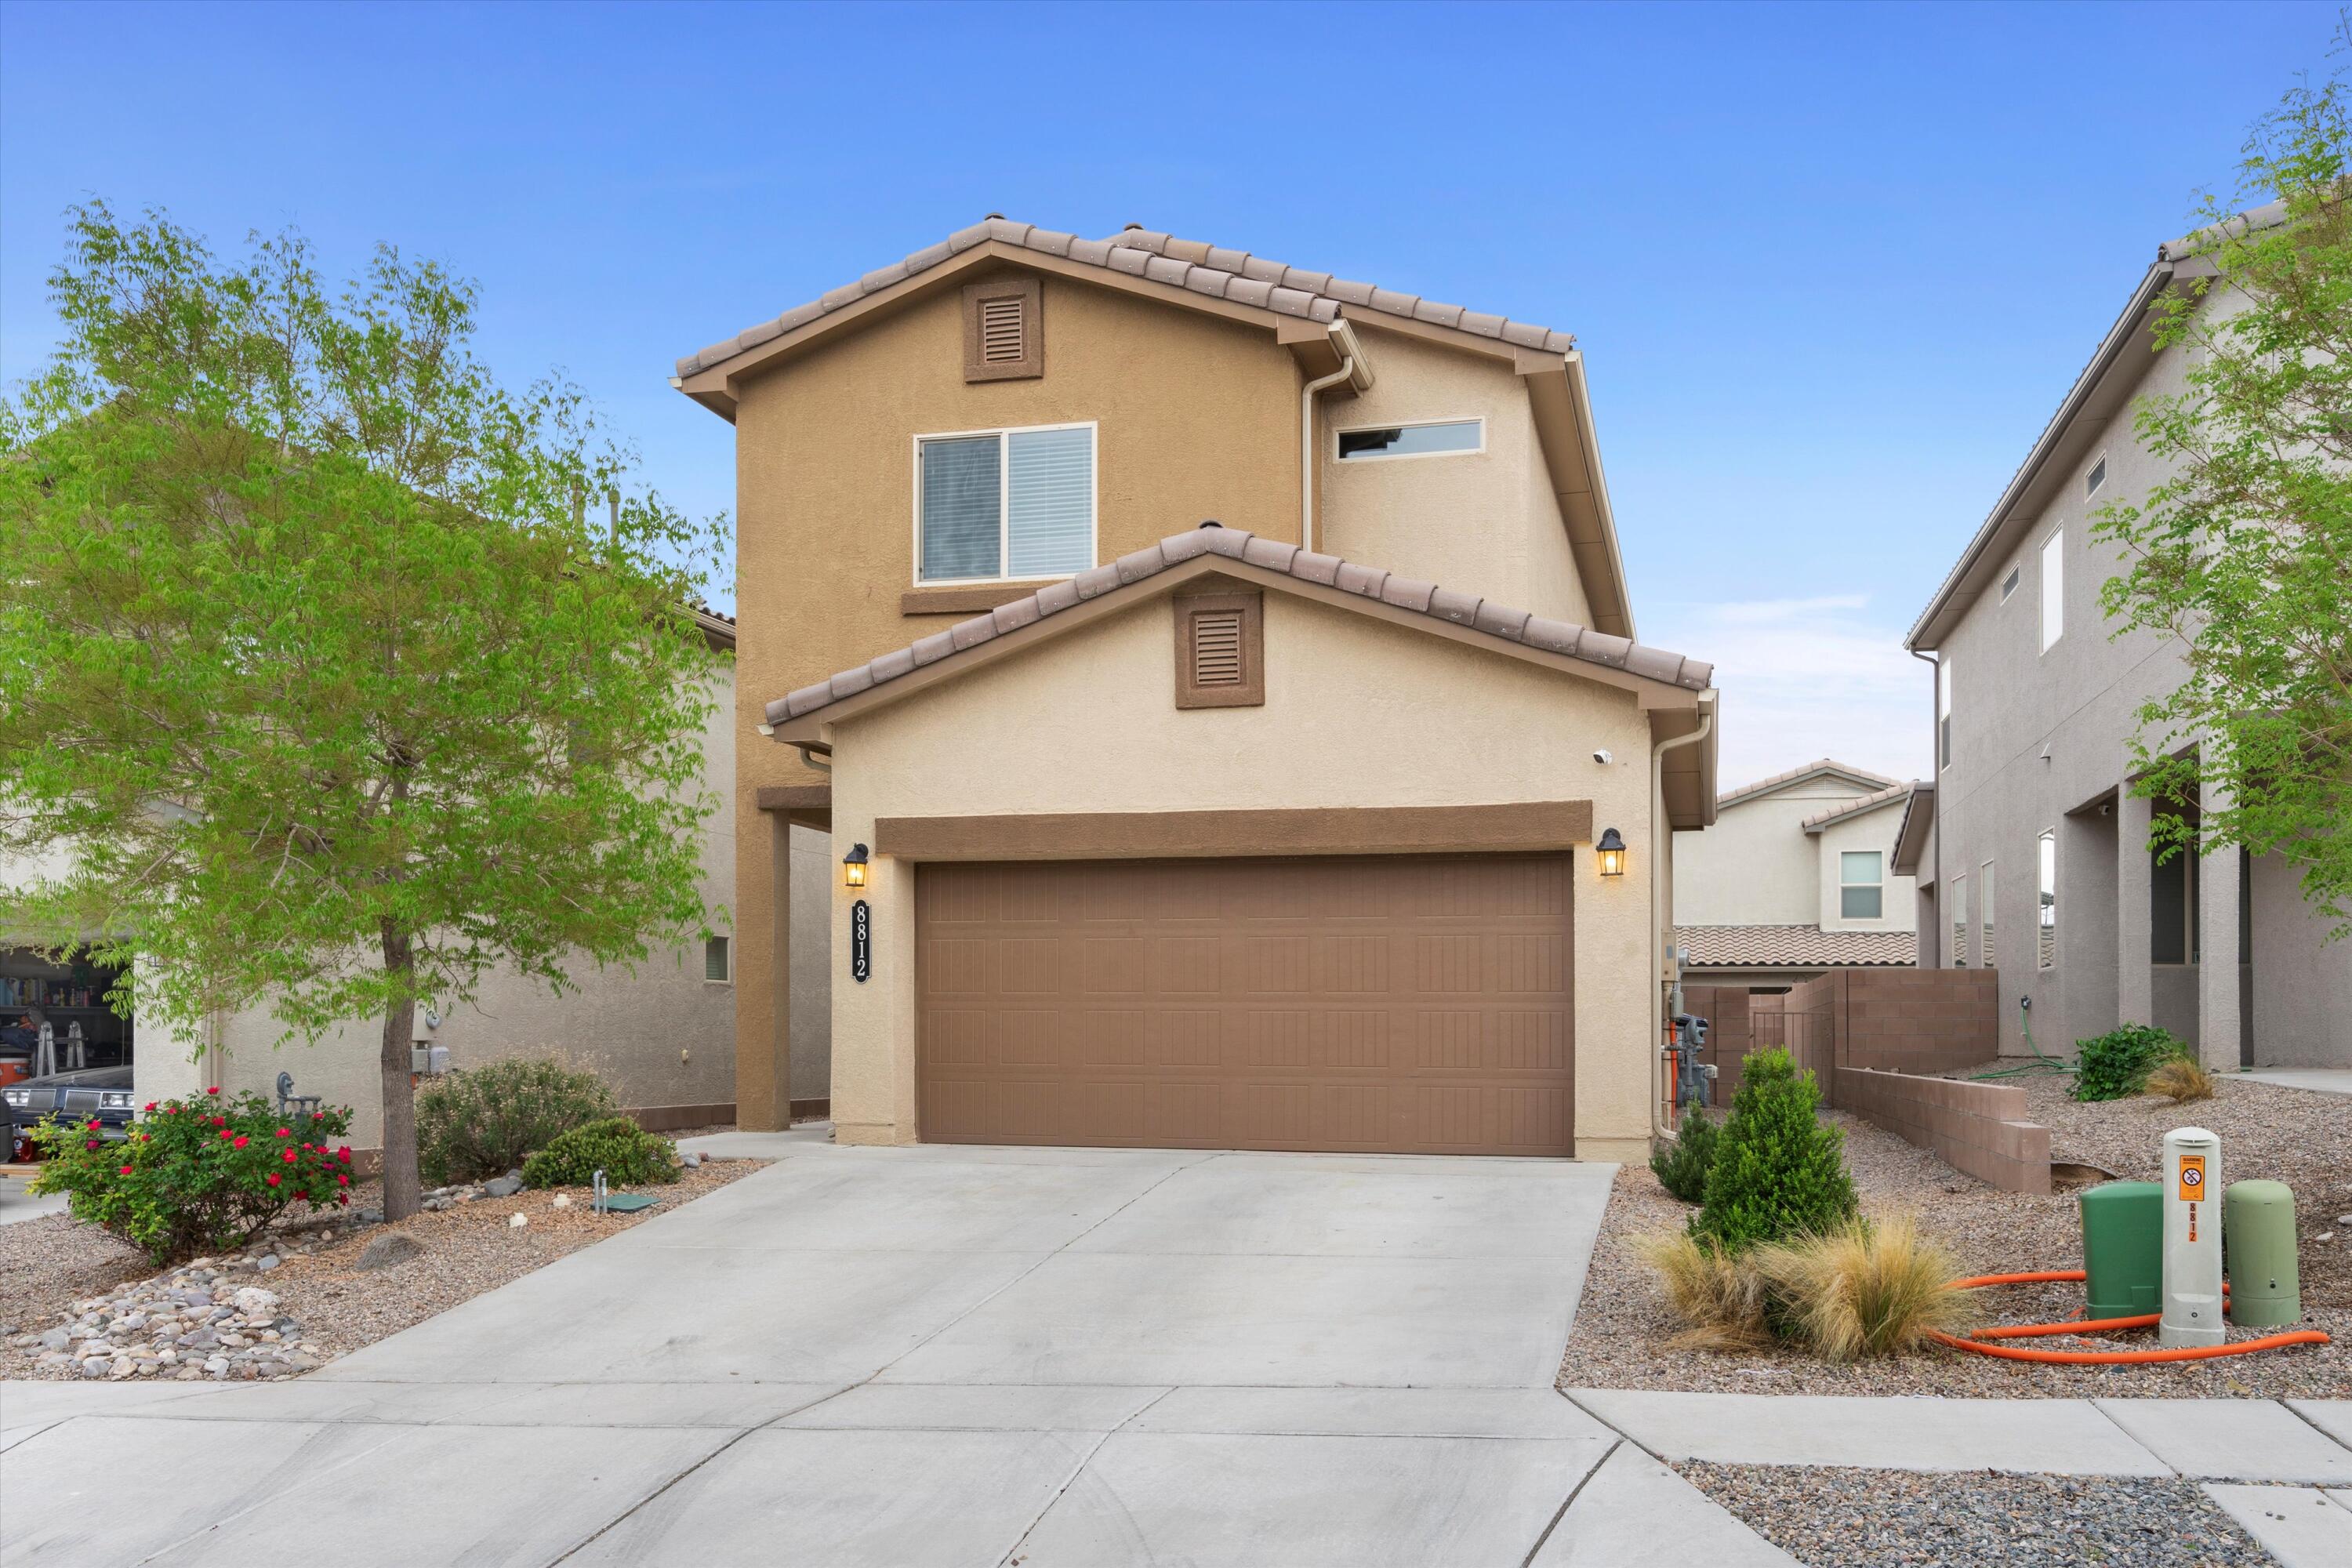 8812 Zephyr Place NW, Albuquerque, New Mexico 87120, 3 Bedrooms Bedrooms, ,3 BathroomsBathrooms,Residential,For Sale,8812 Zephyr Place NW,1061625